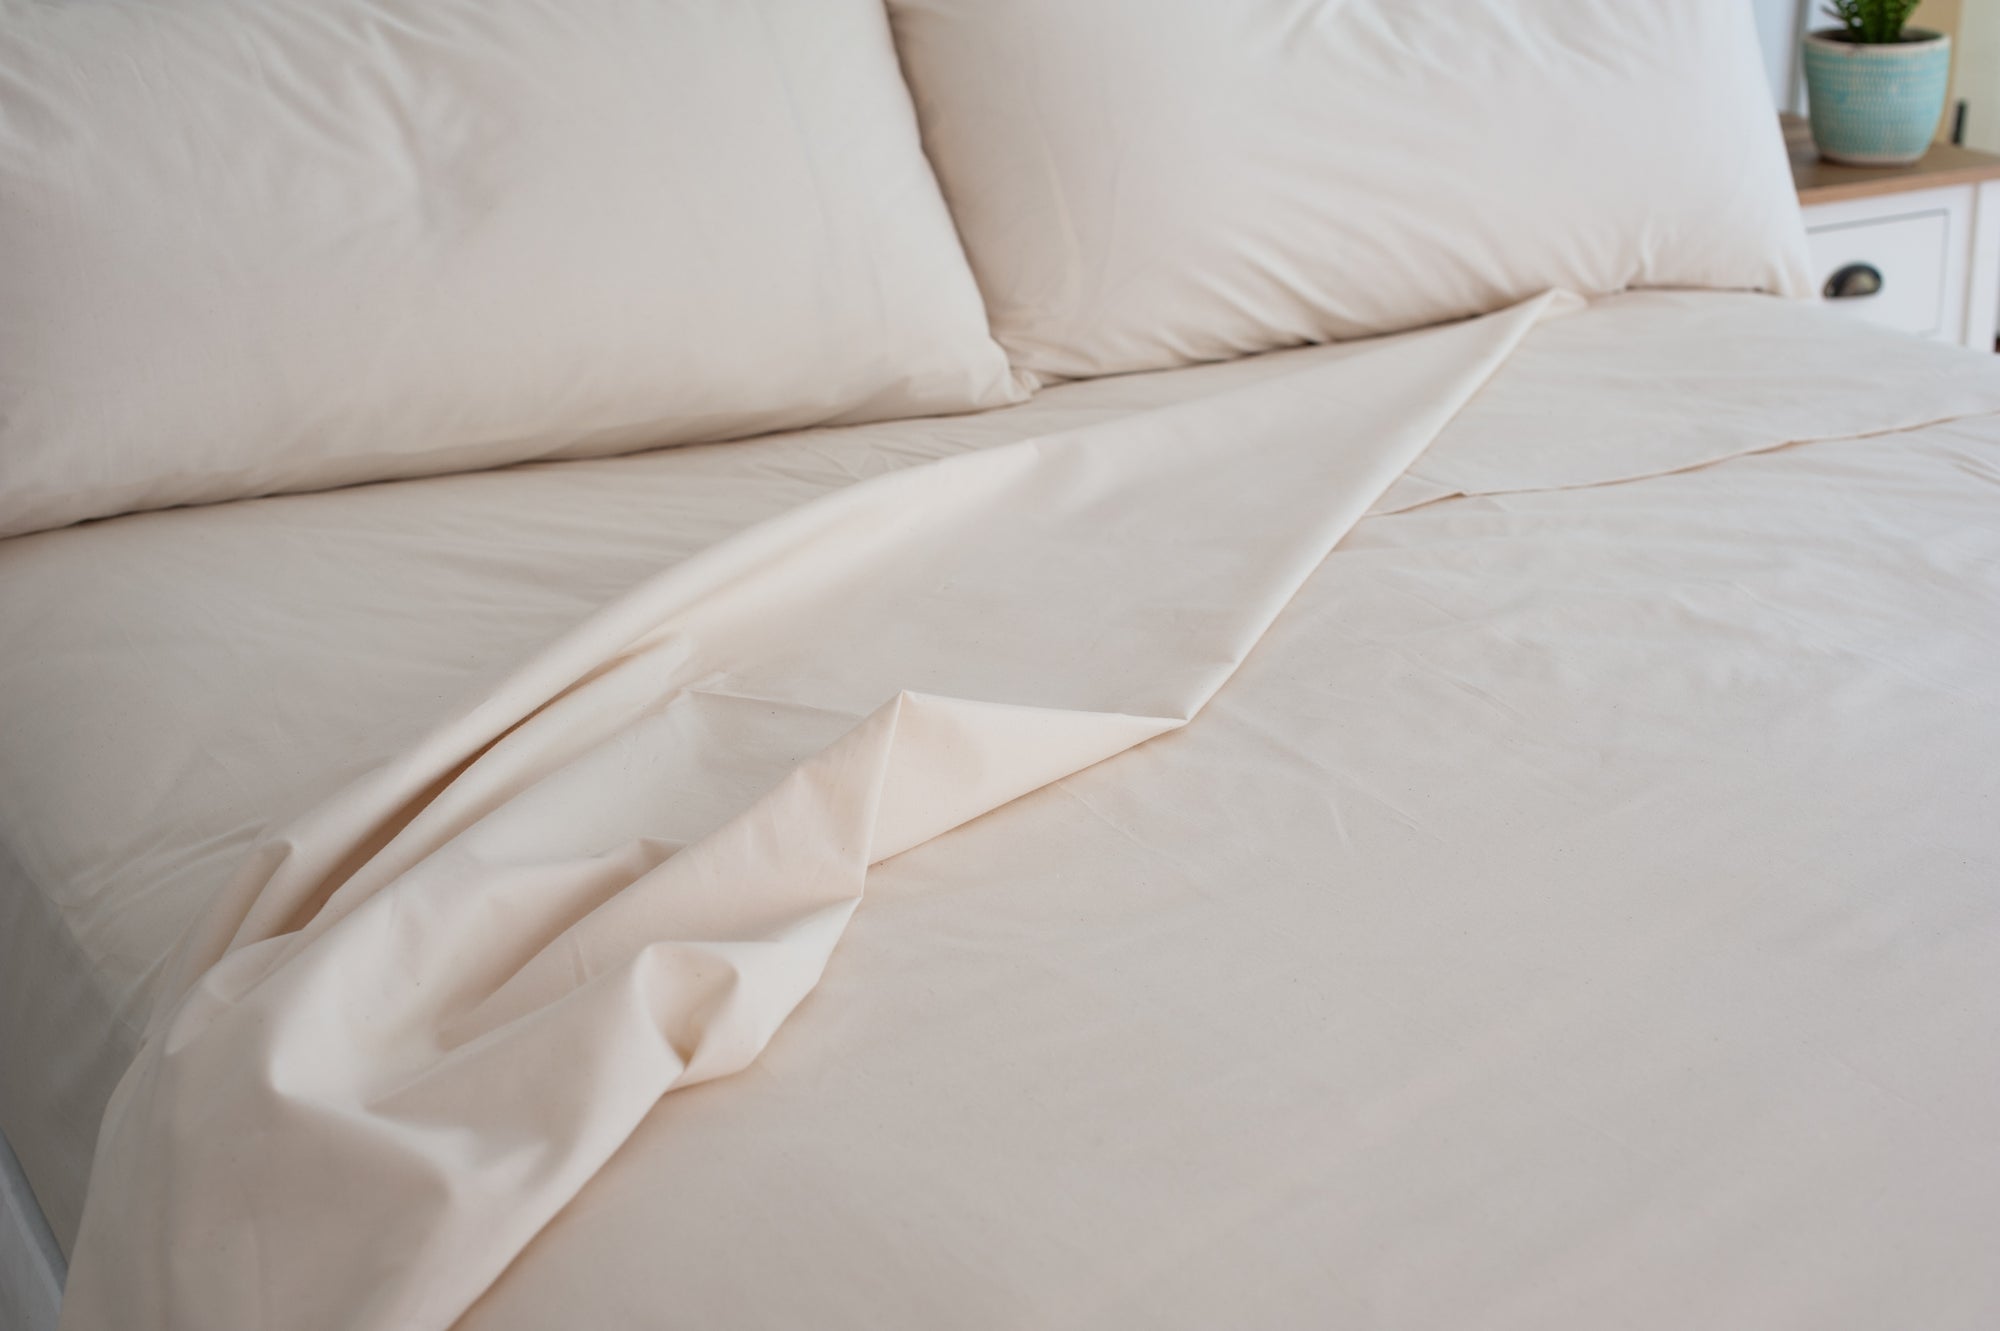 Why Do Bed Linens Wrinkle?